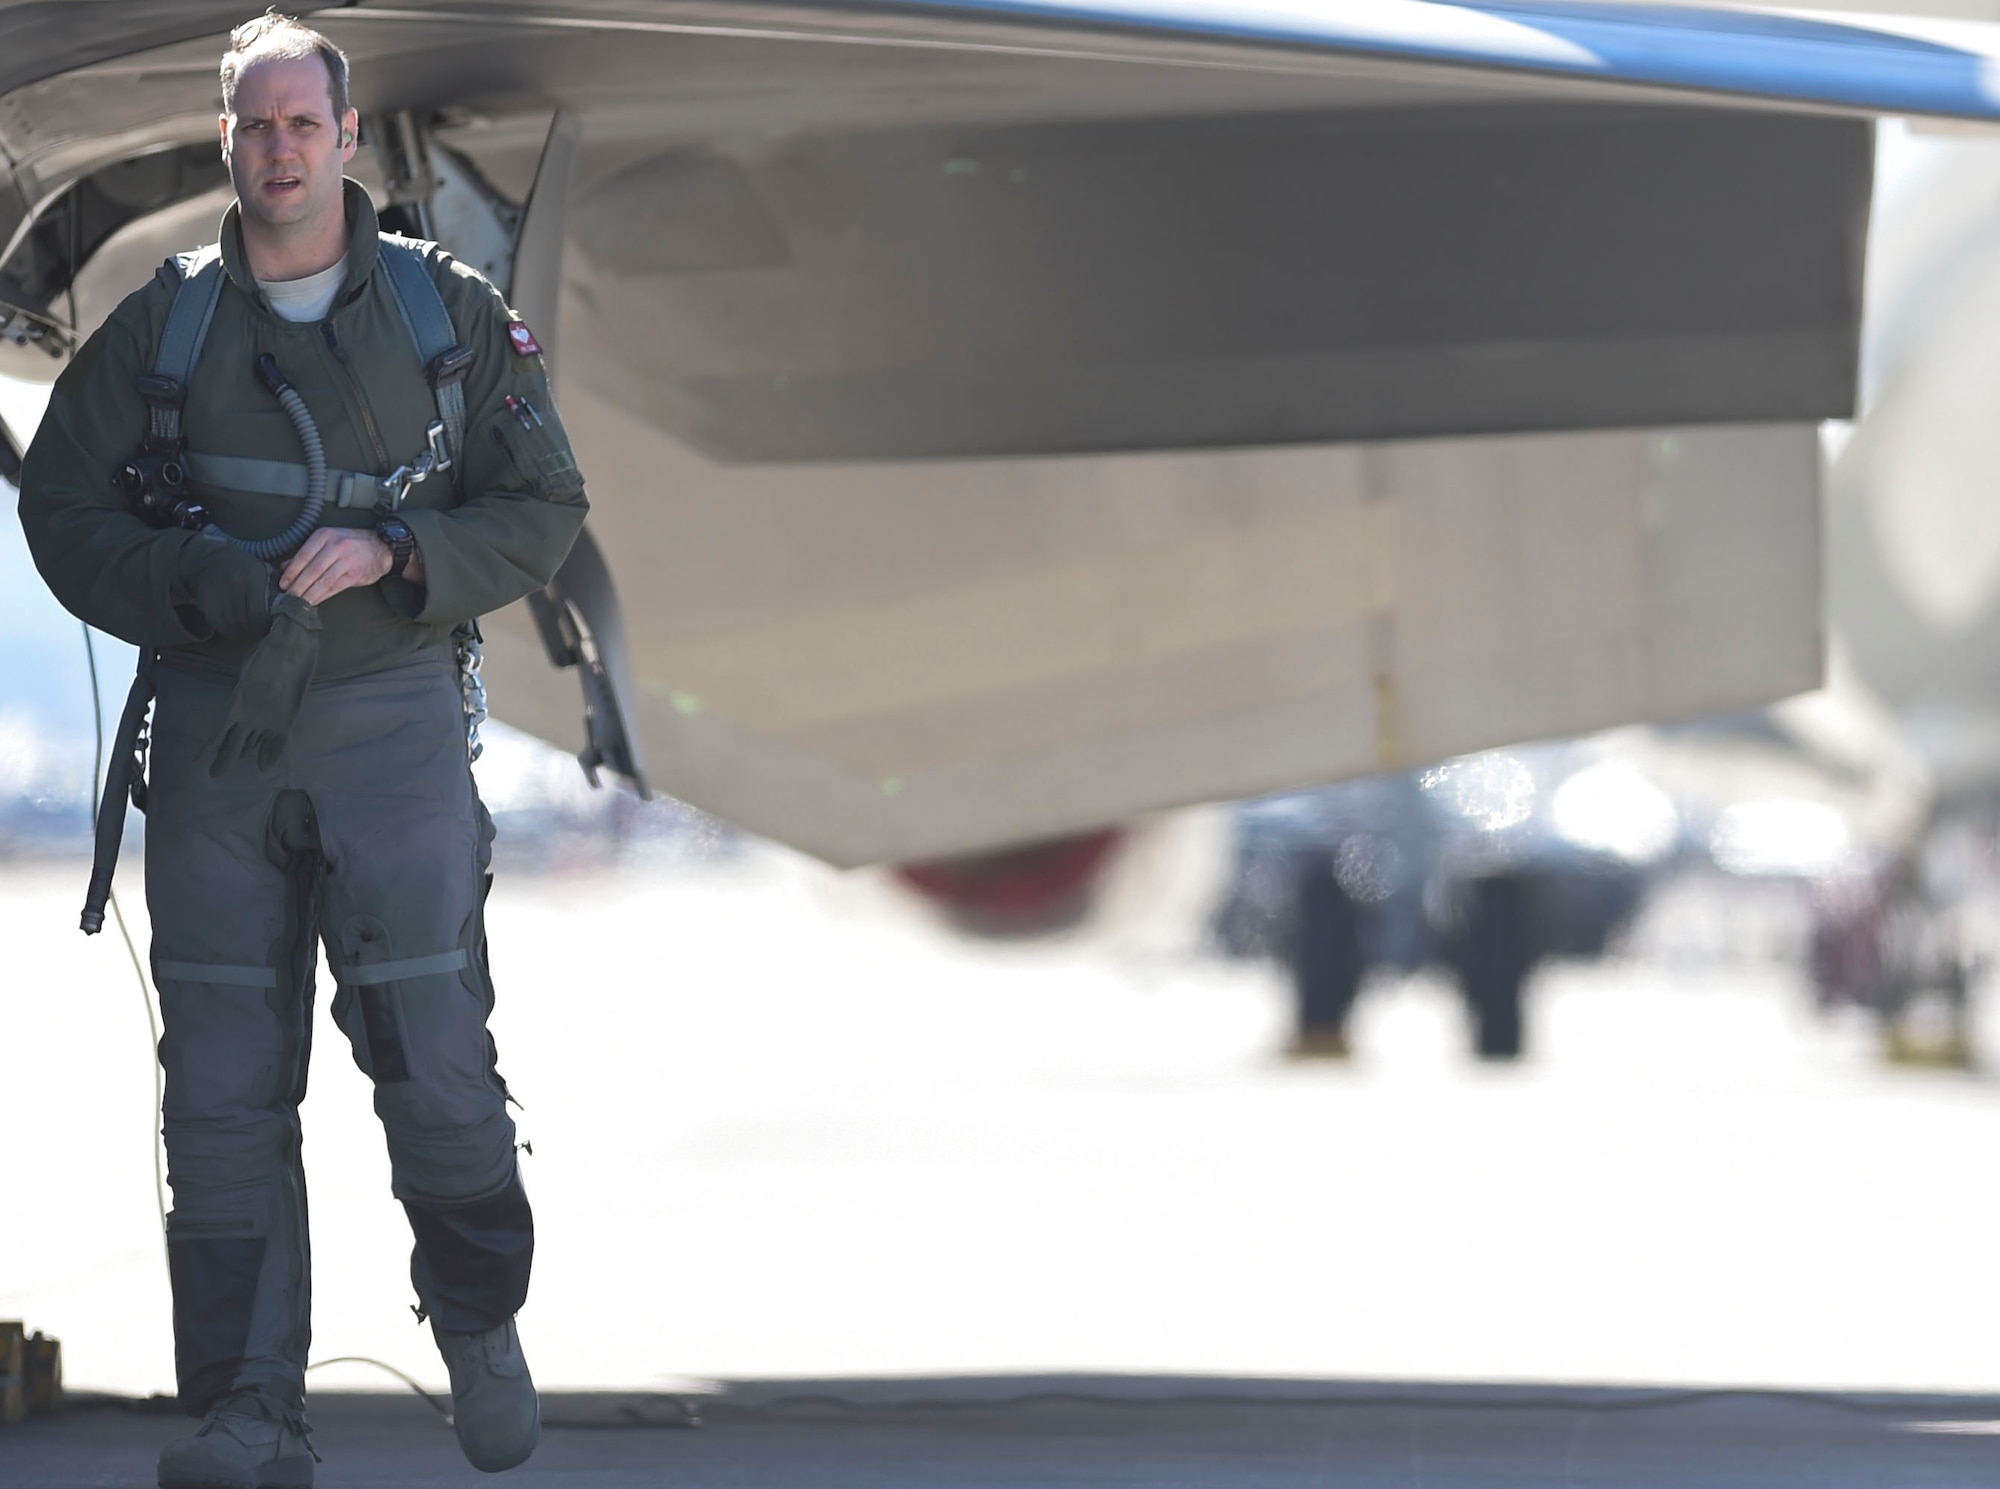 A 1st Fighter Wing F-22 Raptor pilot conducts a walk-around his aircraft before boarding during Red Flag 17-1 at Nellis Air Force Base, Nev., Jan 26, 2017. The Raptors out of Joint Base Langley-Eustis, Va., are working alongside the F-35A Lightning II to suppress enemy targets and provide targeting and cover for fourth-generation aircraft. (U.S Air Force photo by Staff Sgt. Natasha Stannard)